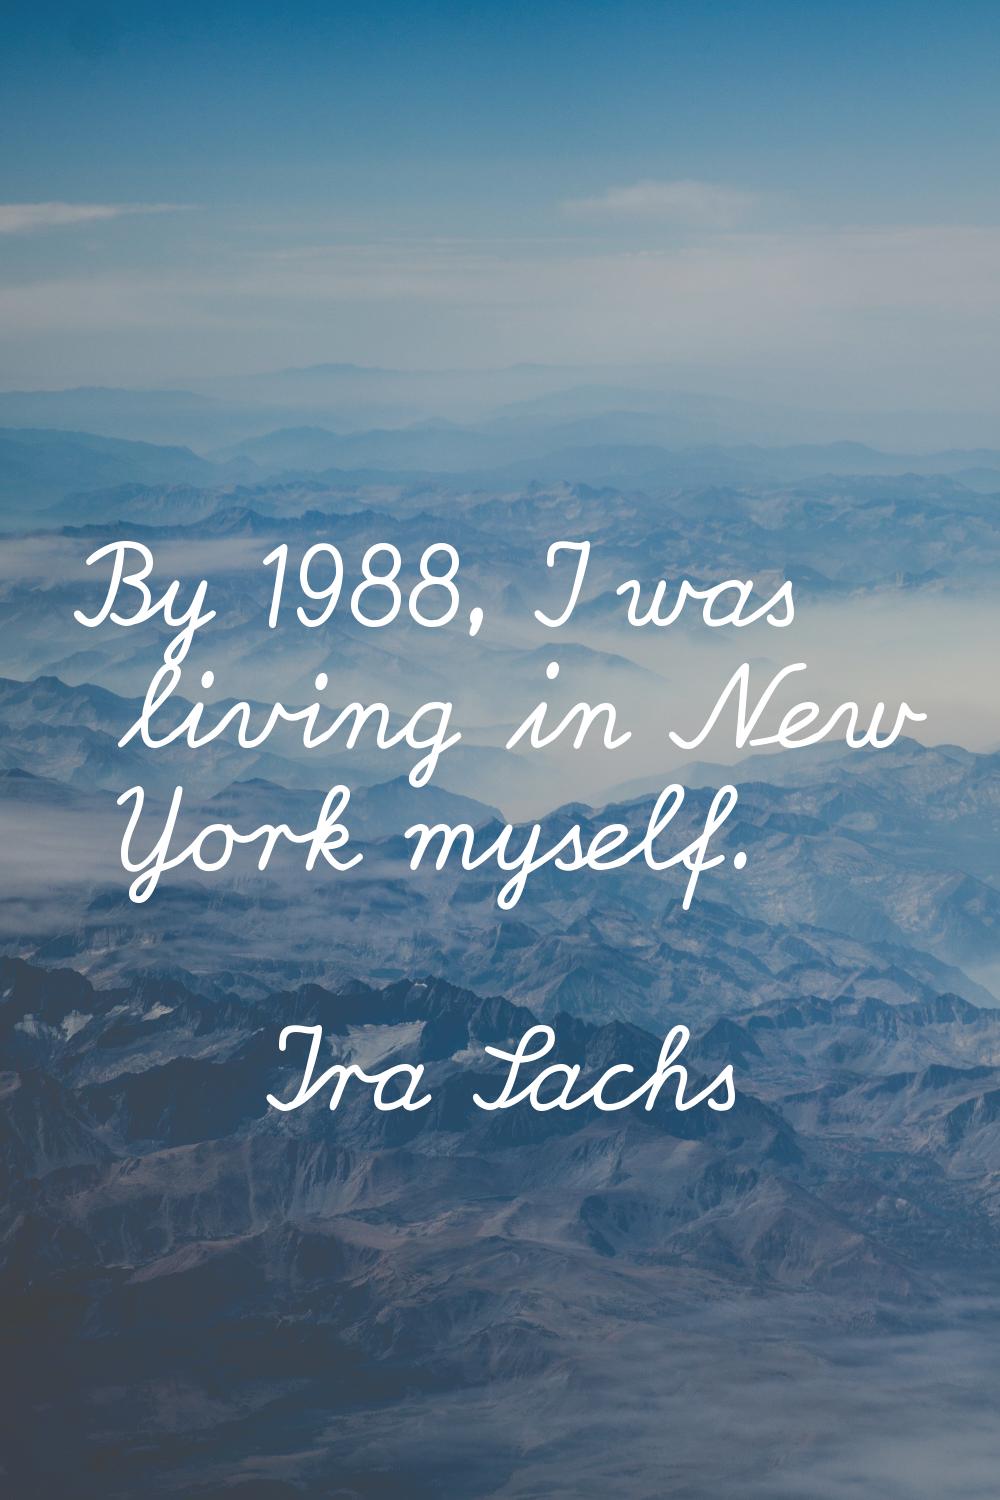 By 1988, I was living in New York myself.